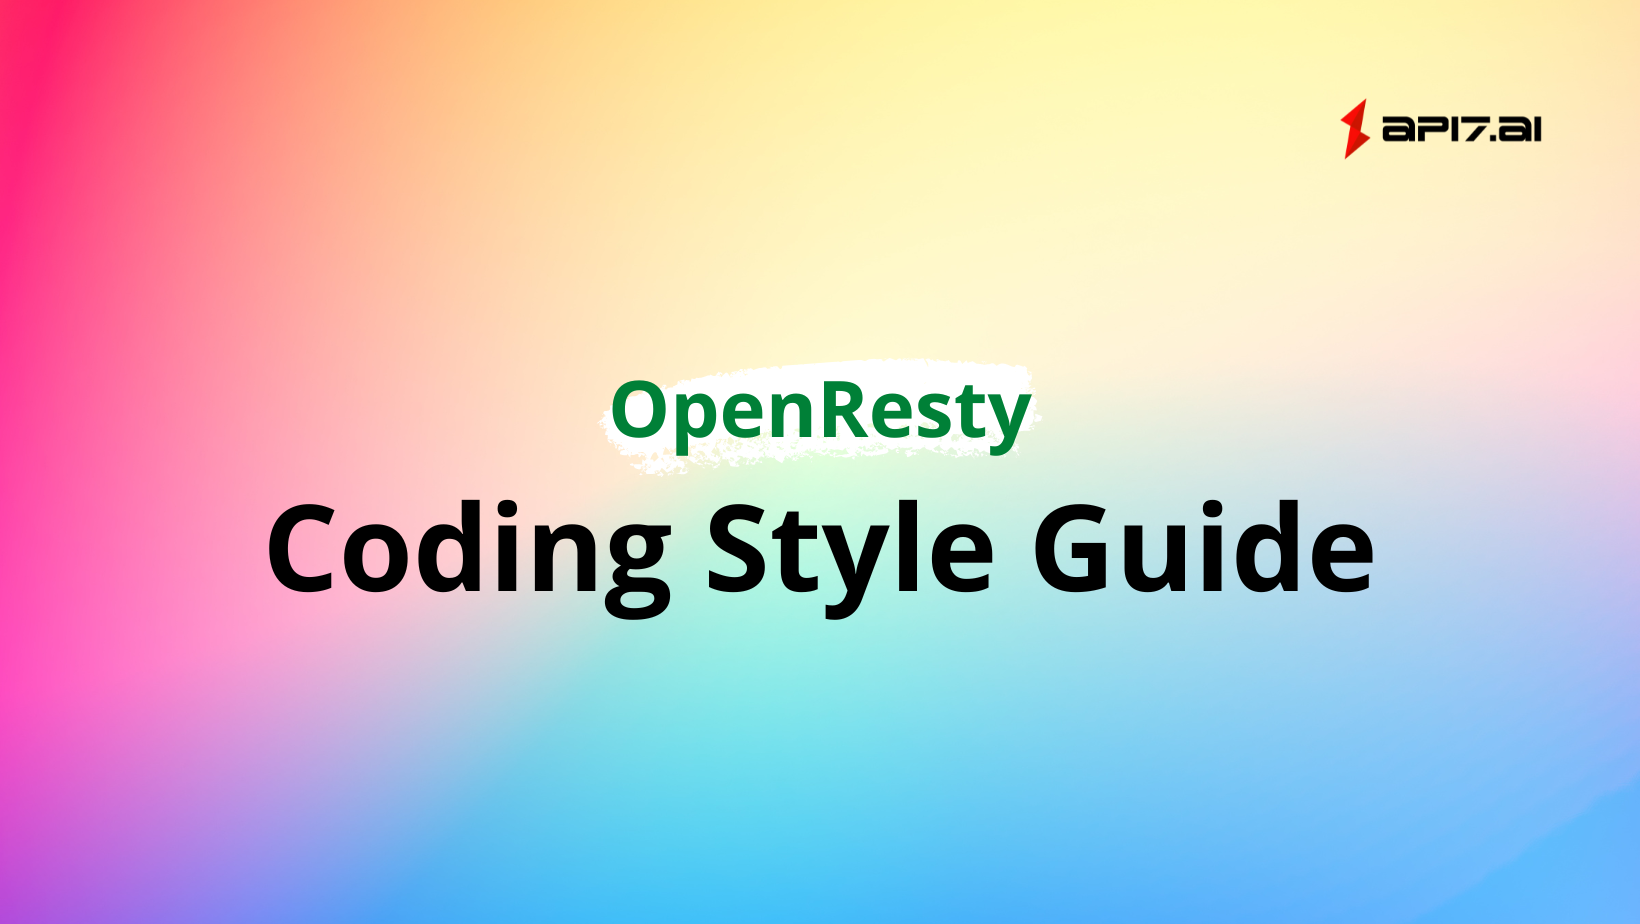 OpenResty Coding Style Guide